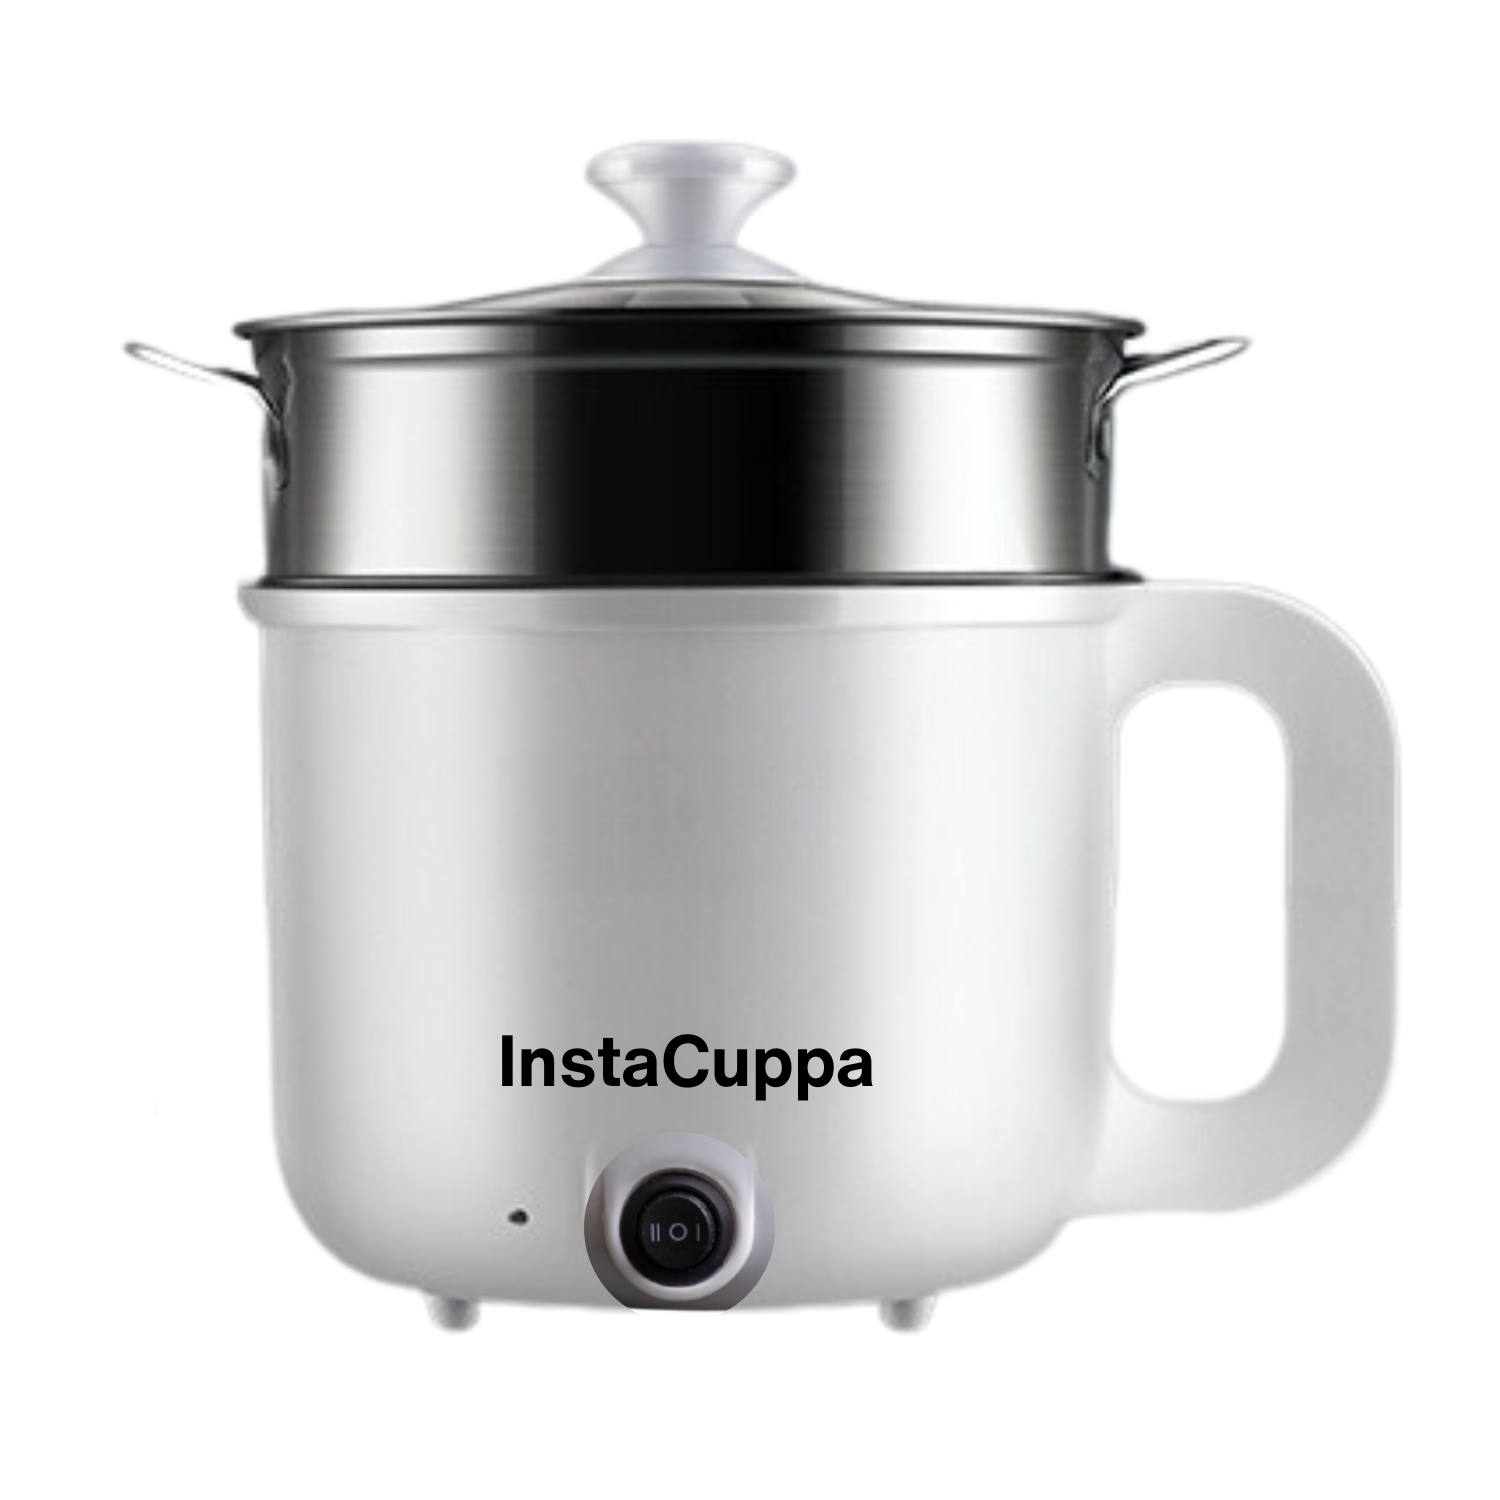 InstaCuppa Multipurpose Electric Kettle Cum Cooker with Free